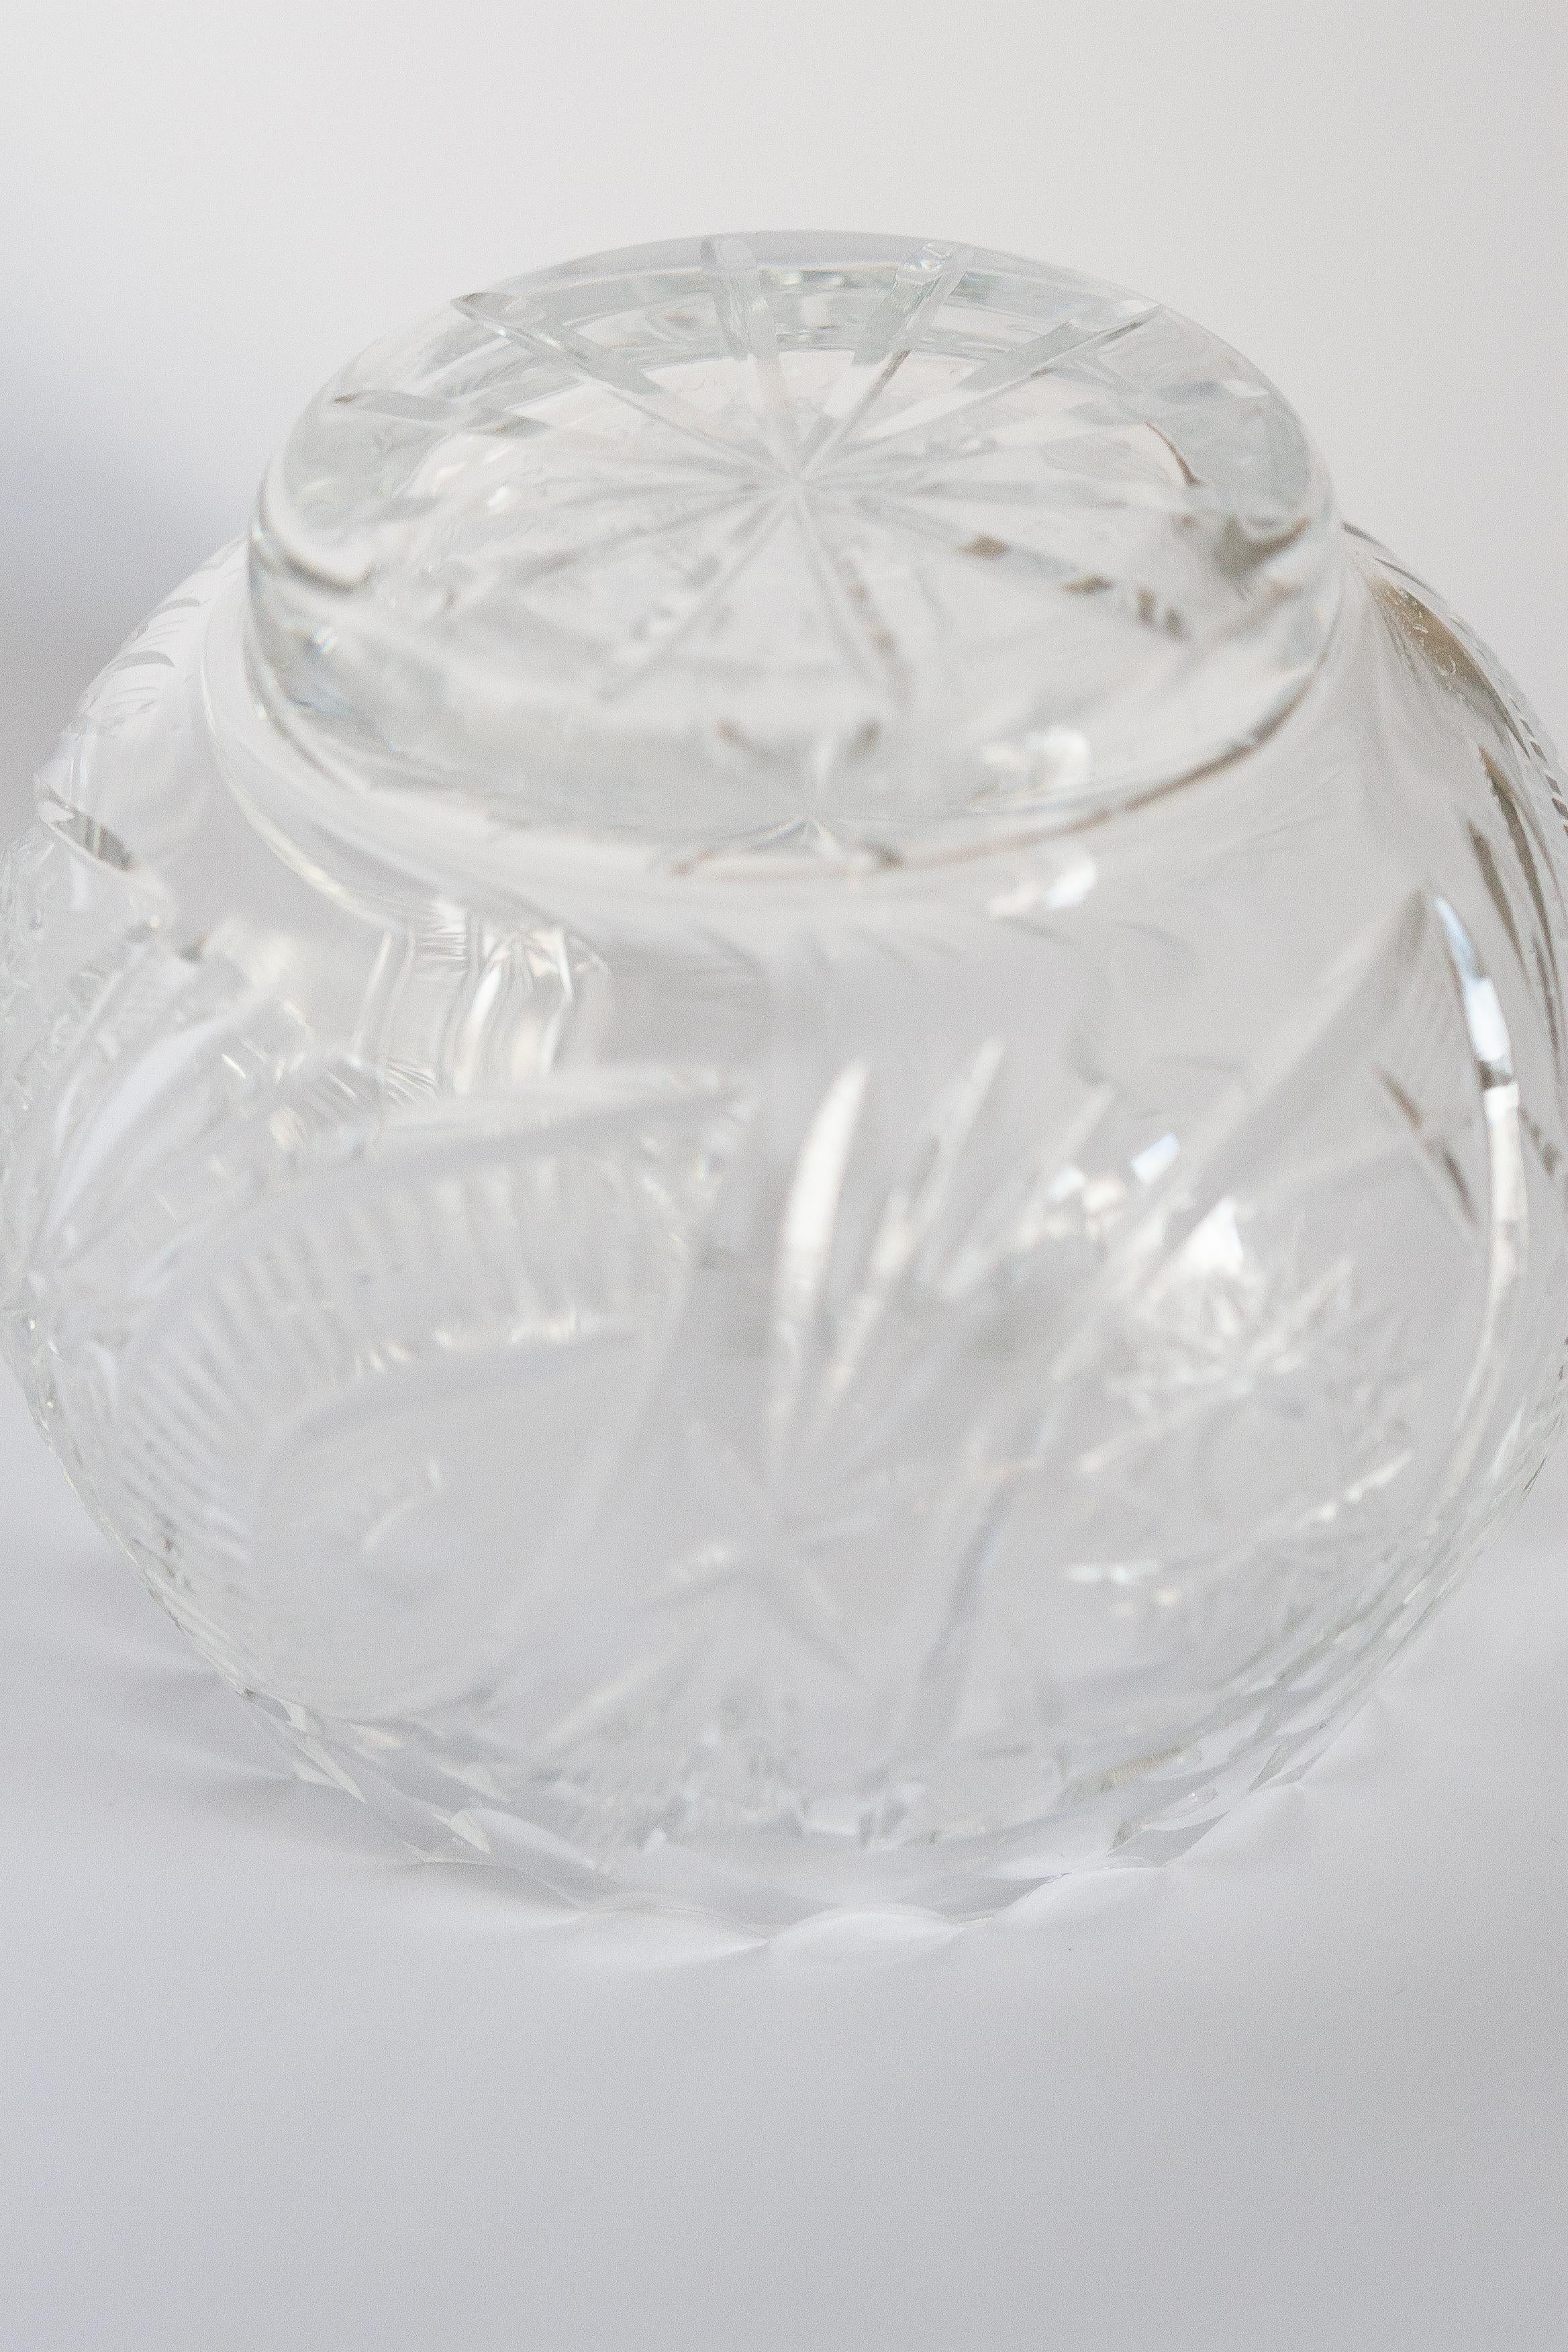 Mid Century Vintage Transparent Crystal Glass Sugar Bowl, Italy, 1960s For Sale 6